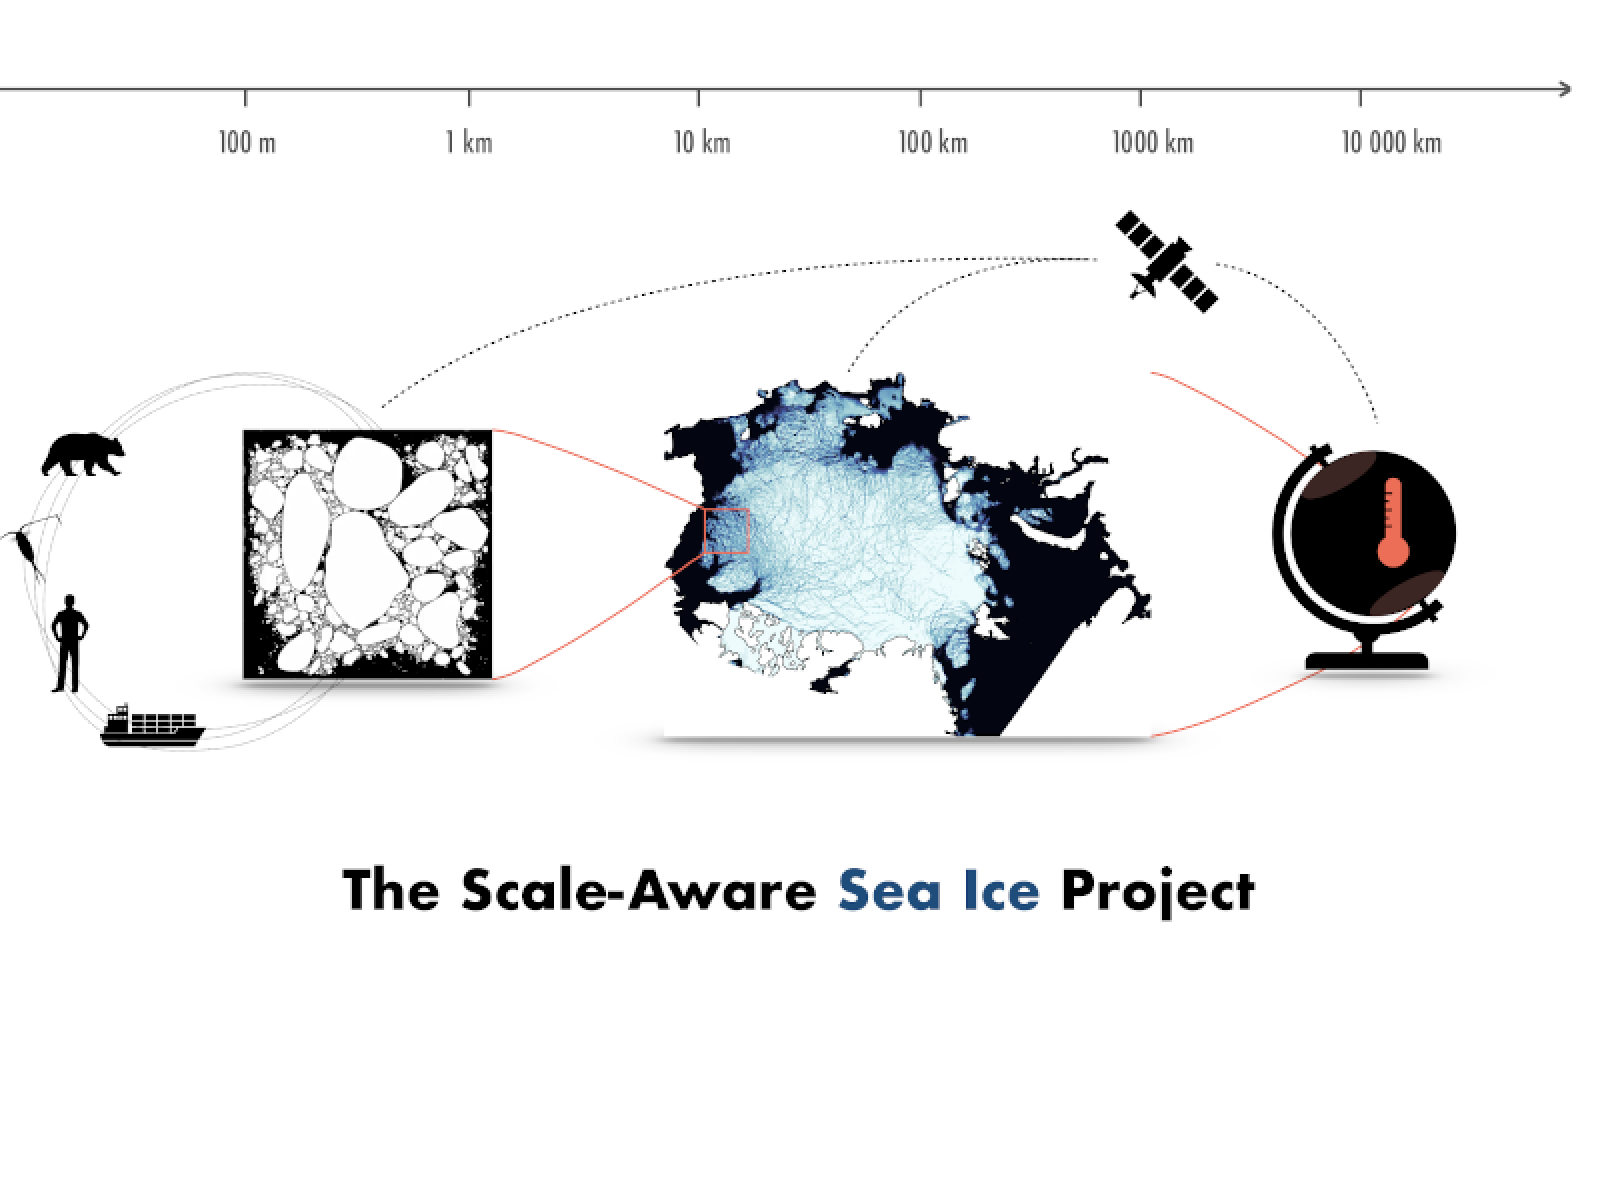 The Scale-Aware Sea Ice Project aims to develop a truly innovative, scale-aware continuum sea ice model for climate research; one that faithfully represents sea ice dynamics and thermodynamics and that is physically sound, data-adaptive, highly parallelized and computationally efﬁcient. SASIP will use machine learning and data assimilation to exploit large datasets obtained from both simulations and remote sensing.